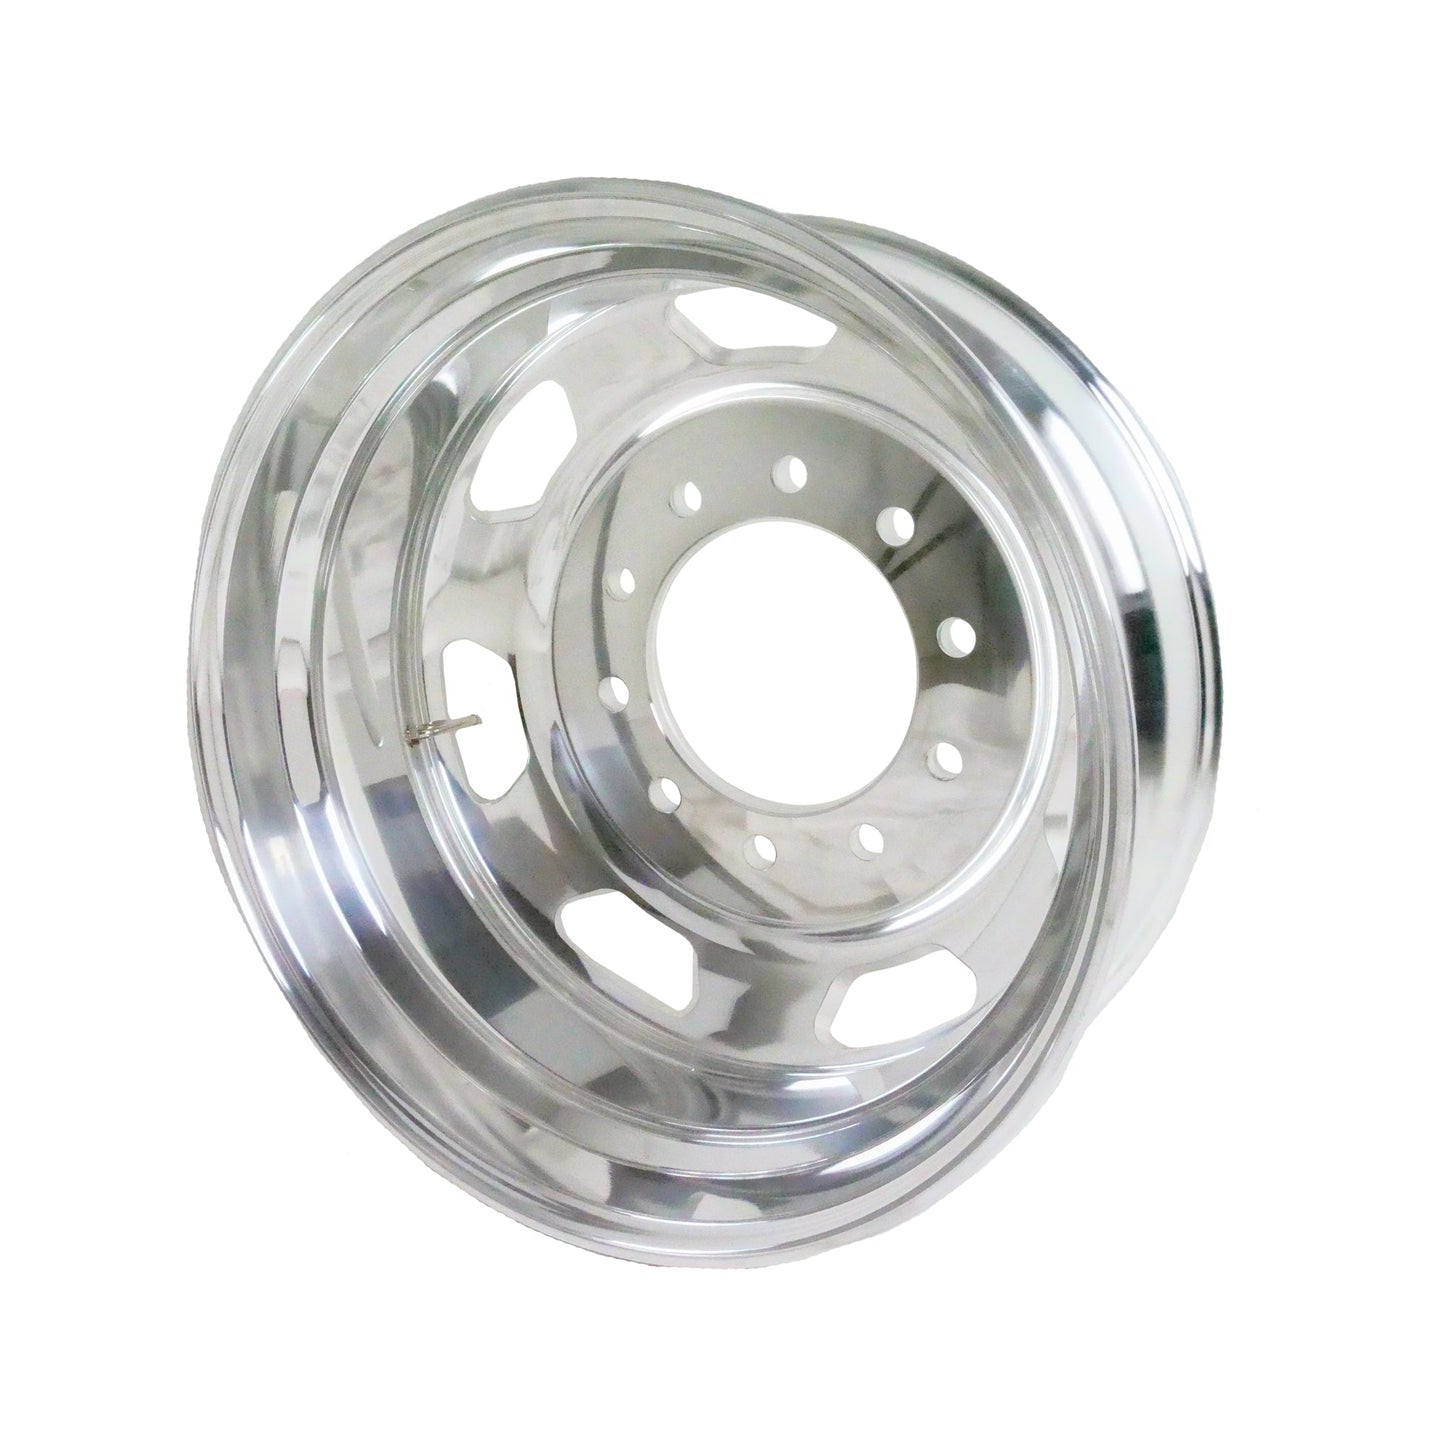 22.5 x 8.25 Kenworth Truck Wheels OEM-Stylized DDP (Delivered Duty Paid)  WHOLESALE PRICE $189/pc 600 pcs